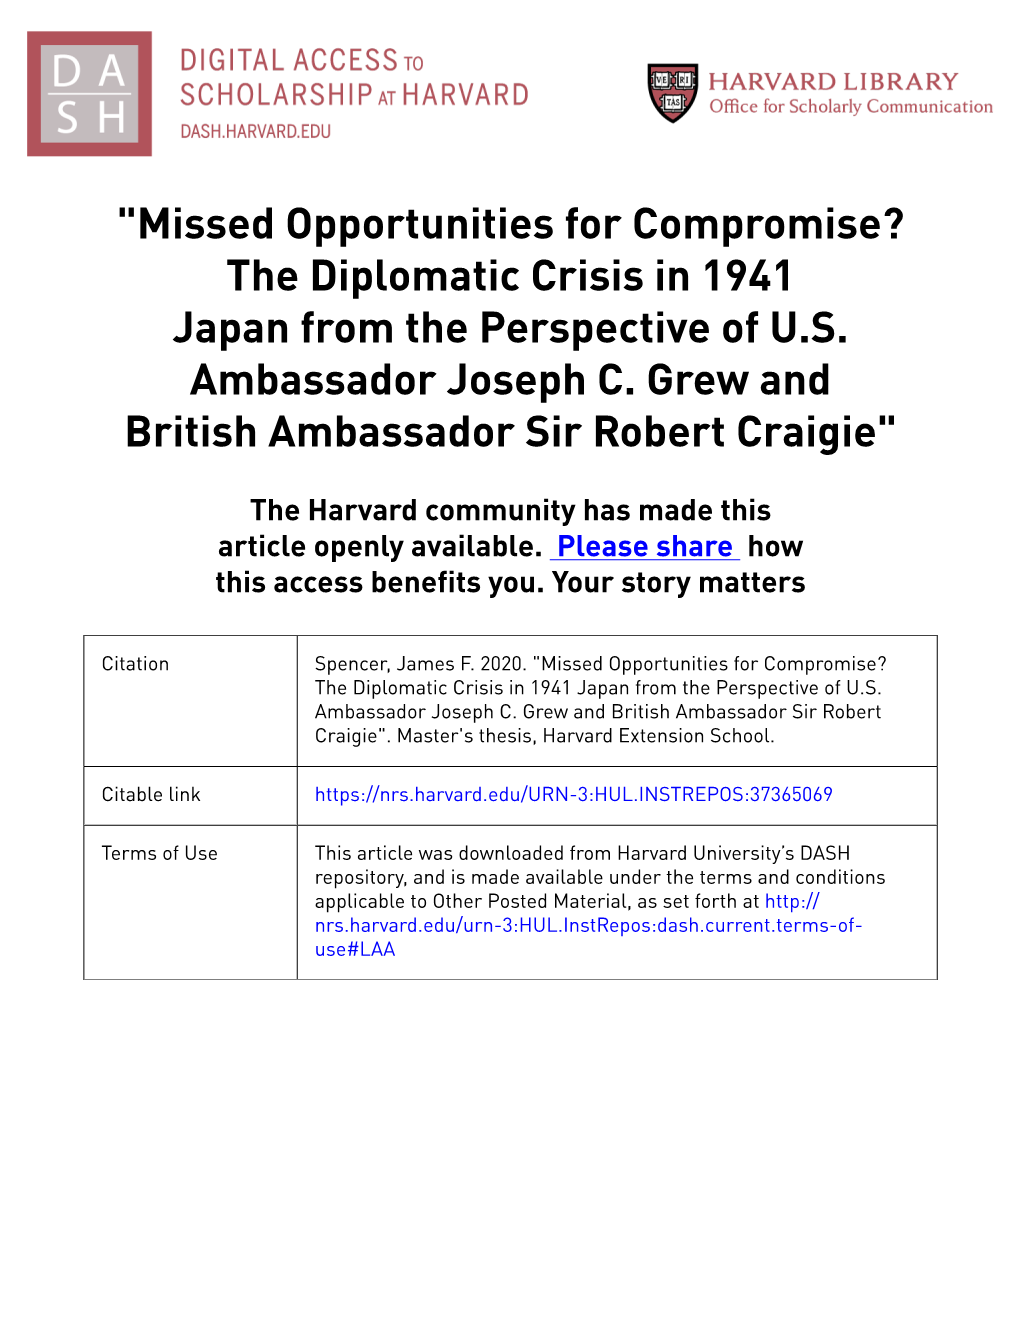 Missed Opportunities for Compromise? the Diplomatic Crisis in 1941 Japan from the Perspective of US Ambassador Joseph C